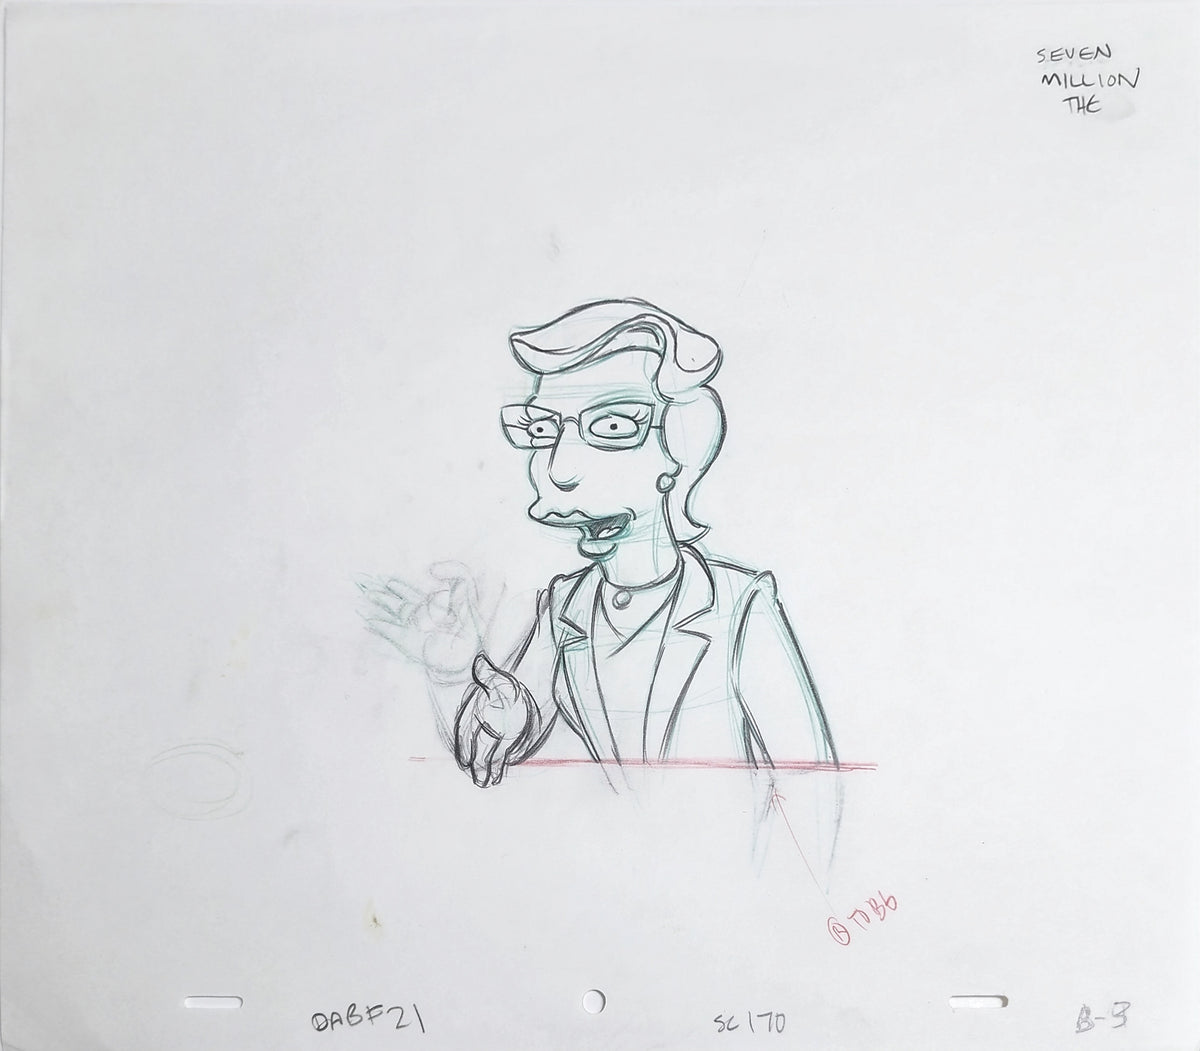 Simpsons Animation Production Cel Drawing - 3816